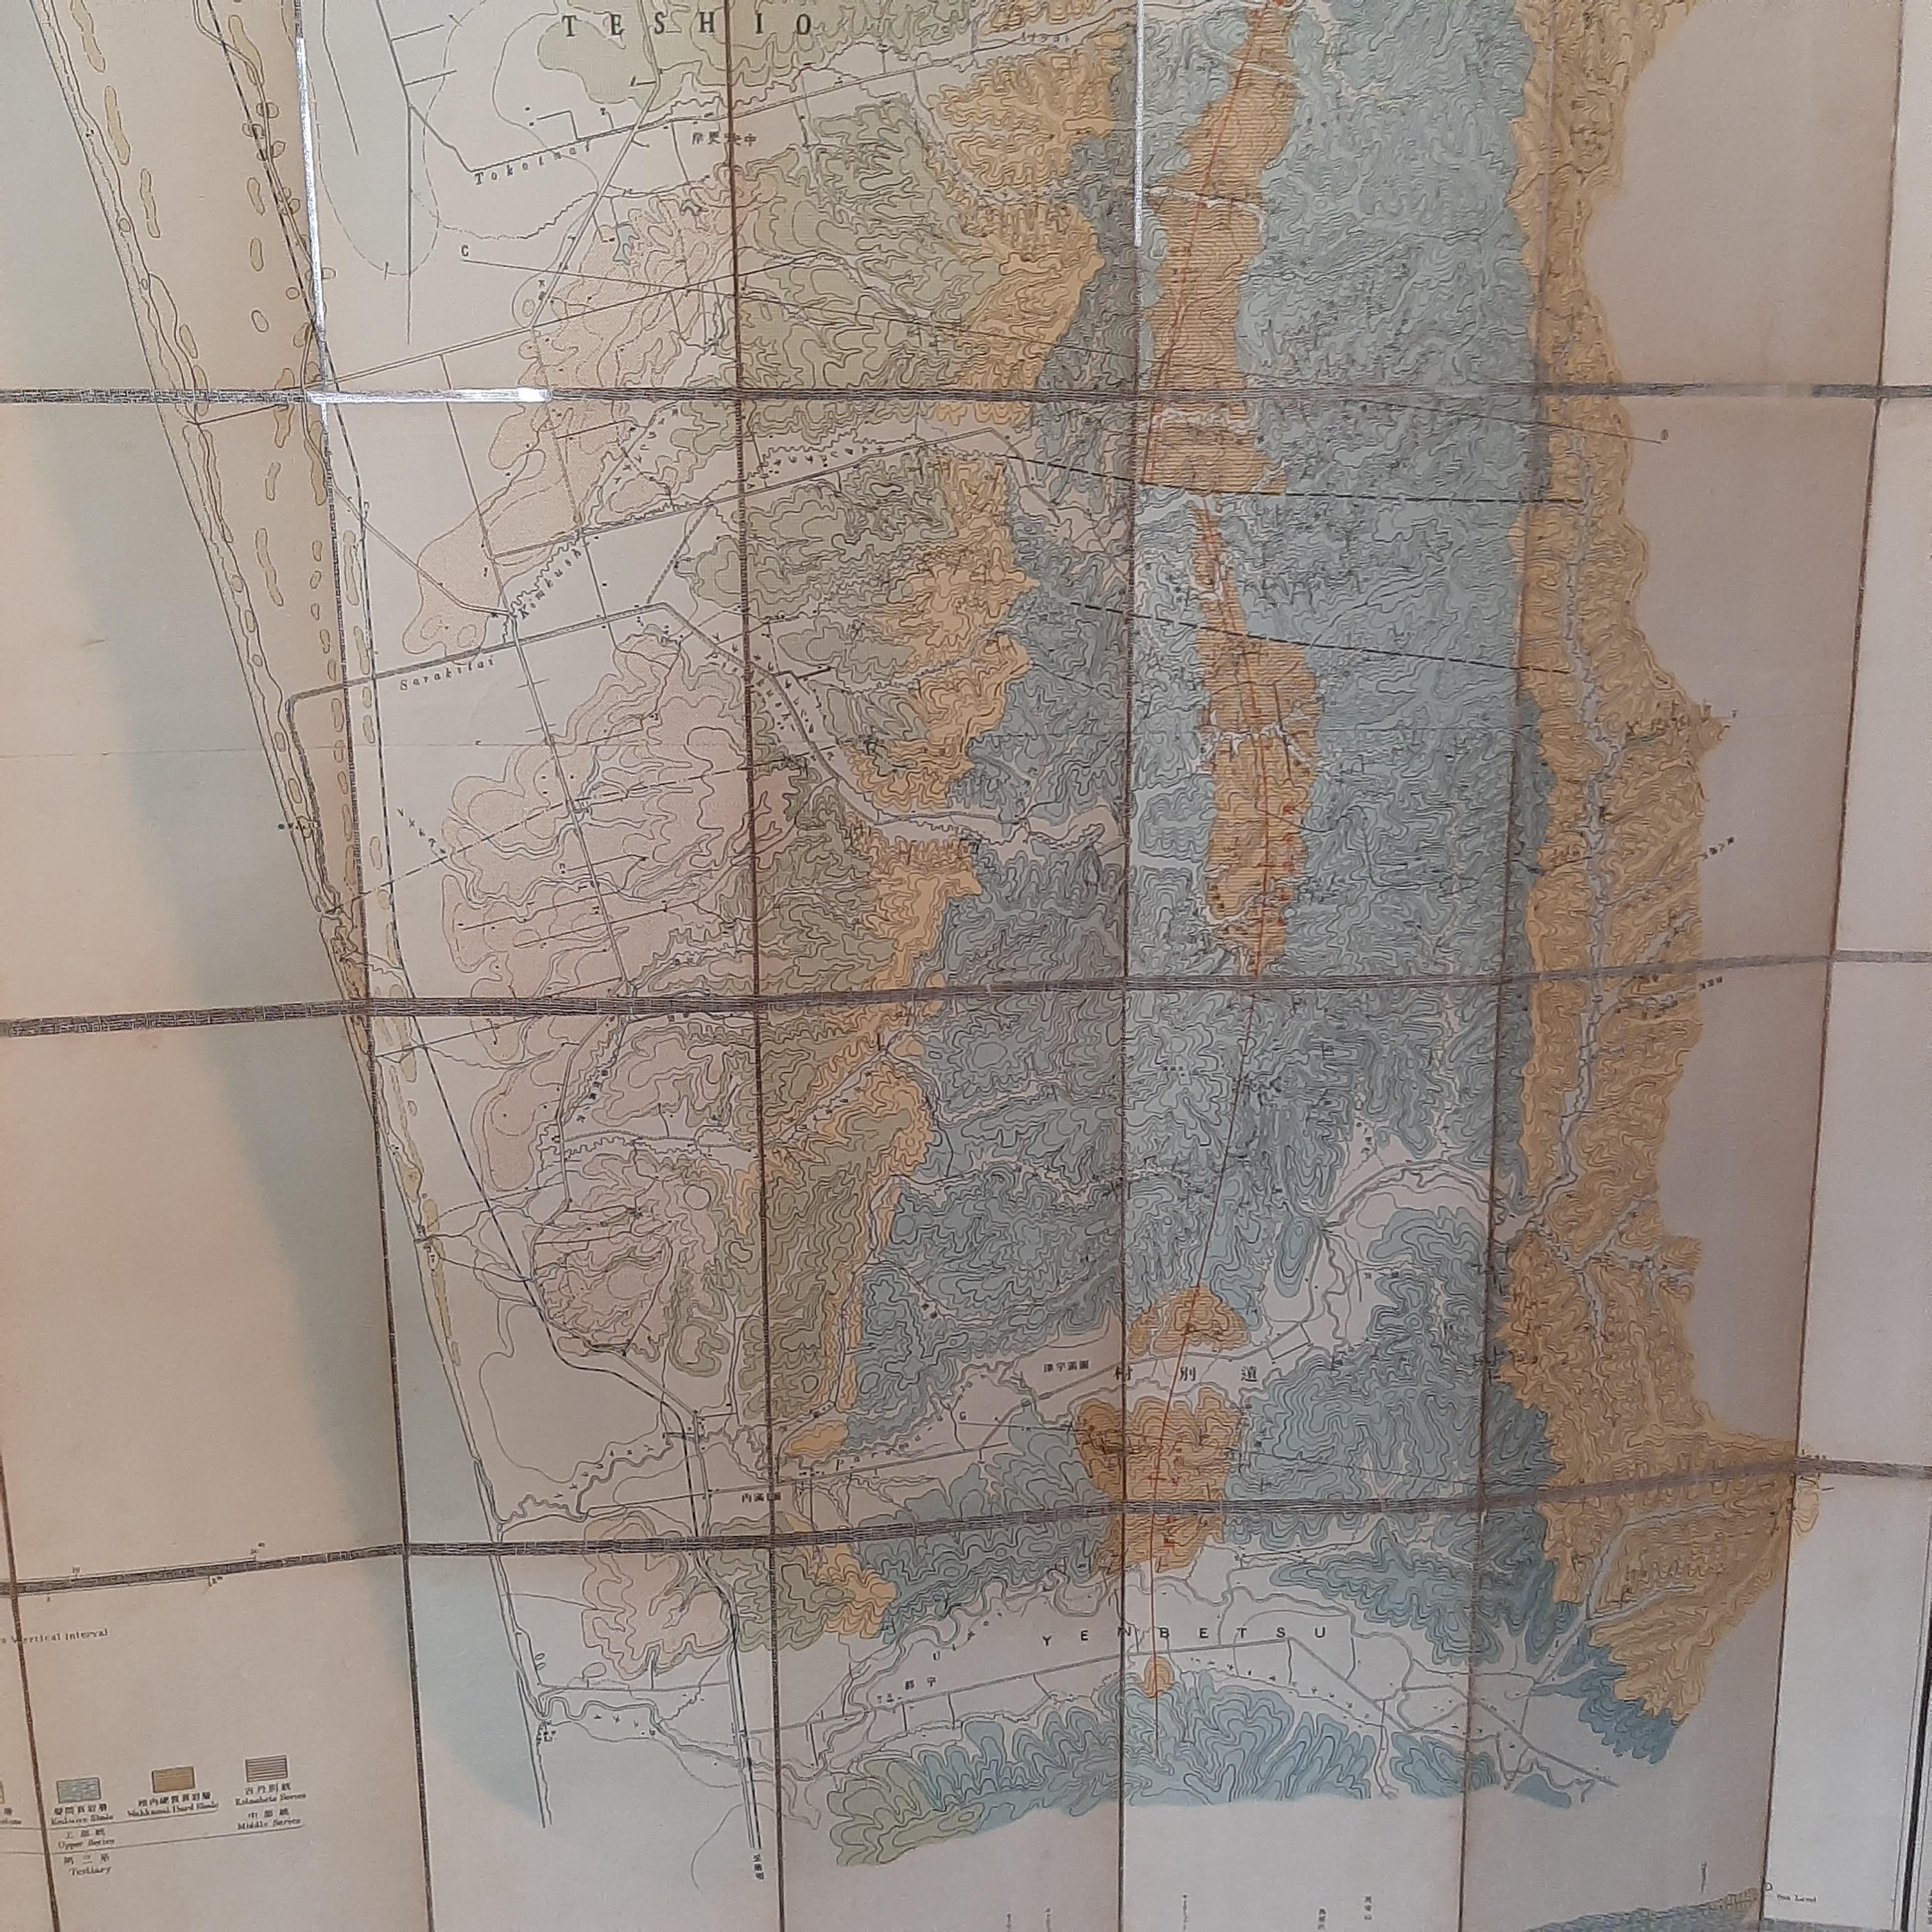 20th Century Large Topographical and Geological Map of the Teshio Oil Field, '1936' For Sale